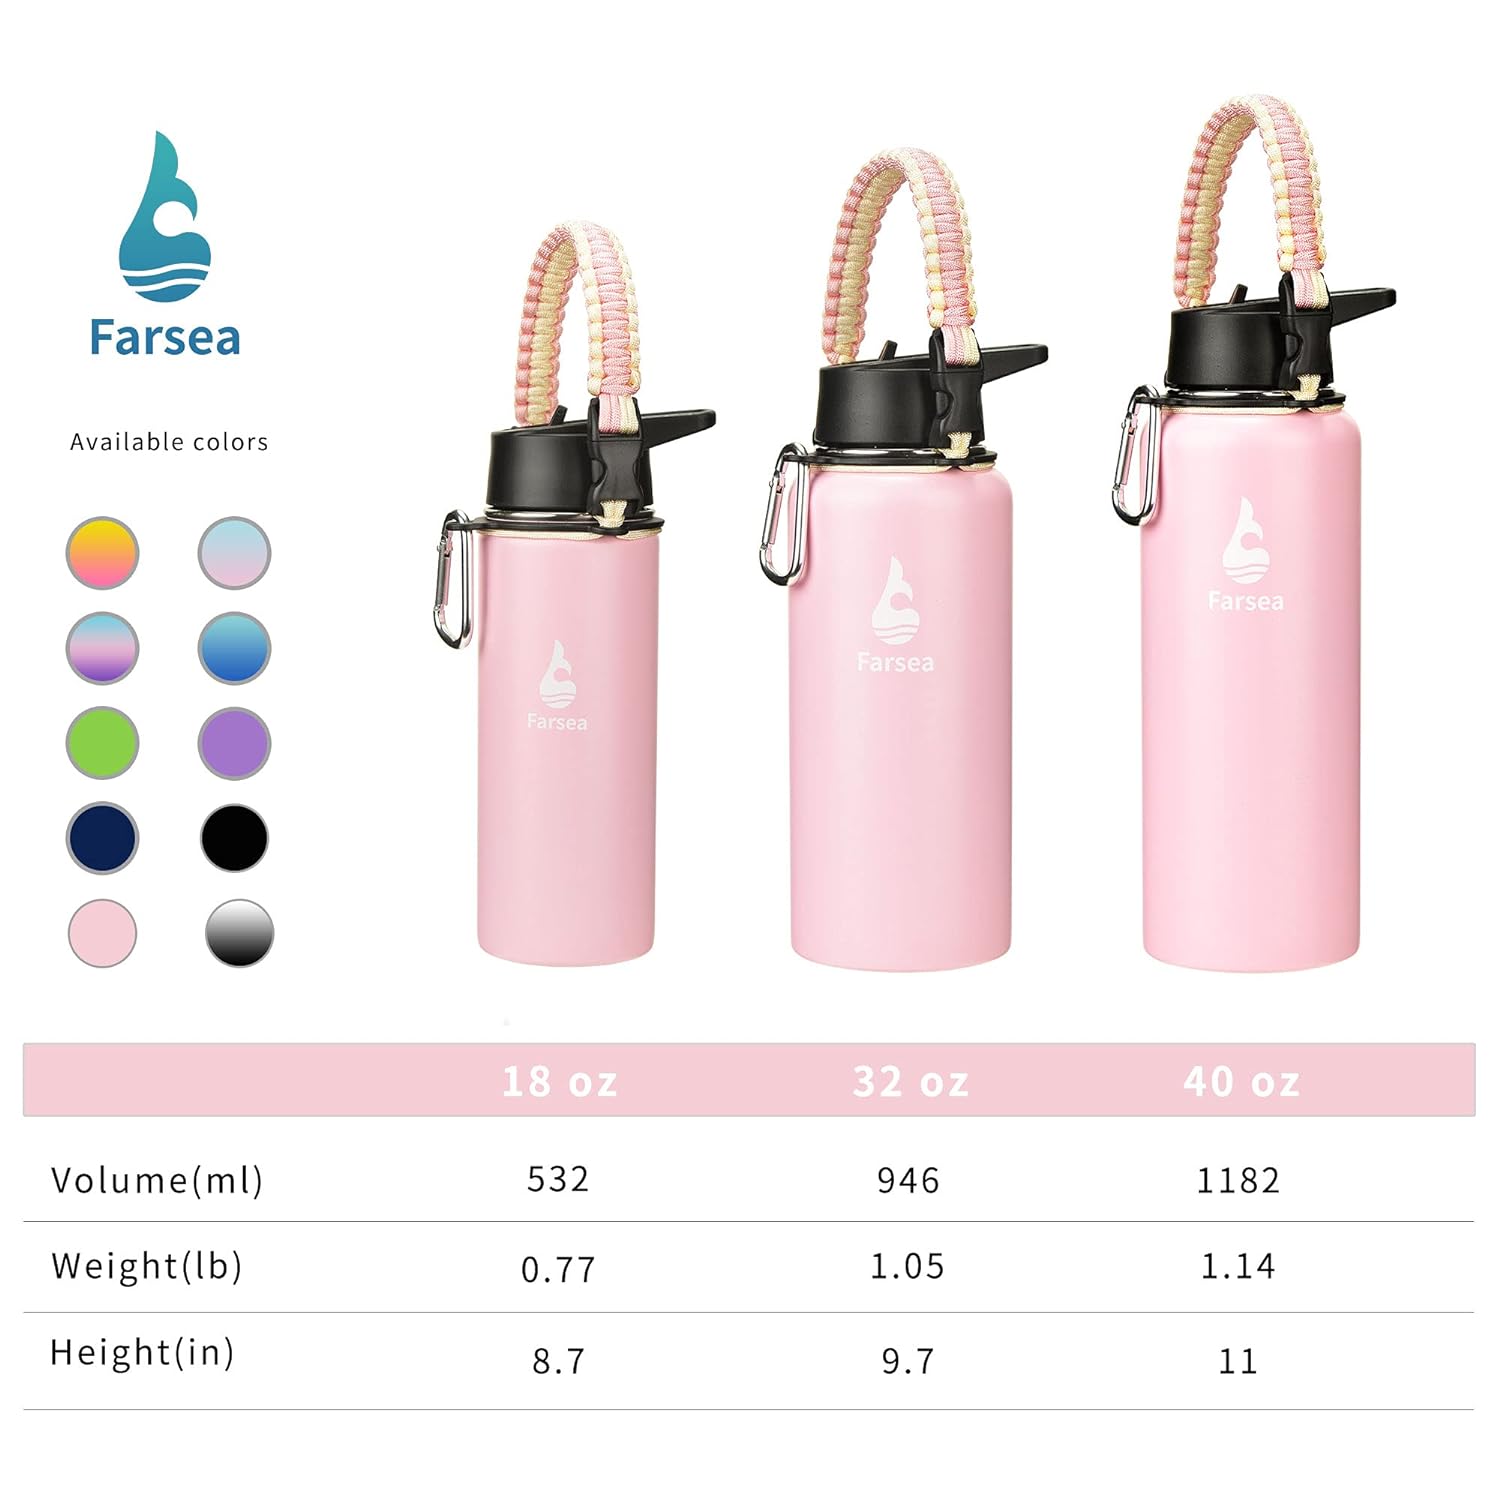 Farsea Insulated Stainless Steel Water Bottle, Vacuum Wide Mouth Water Flask with Straw Lids and Paracord Handle, Double Wall Sweat-proof BPA Free, 18 oz, Pink